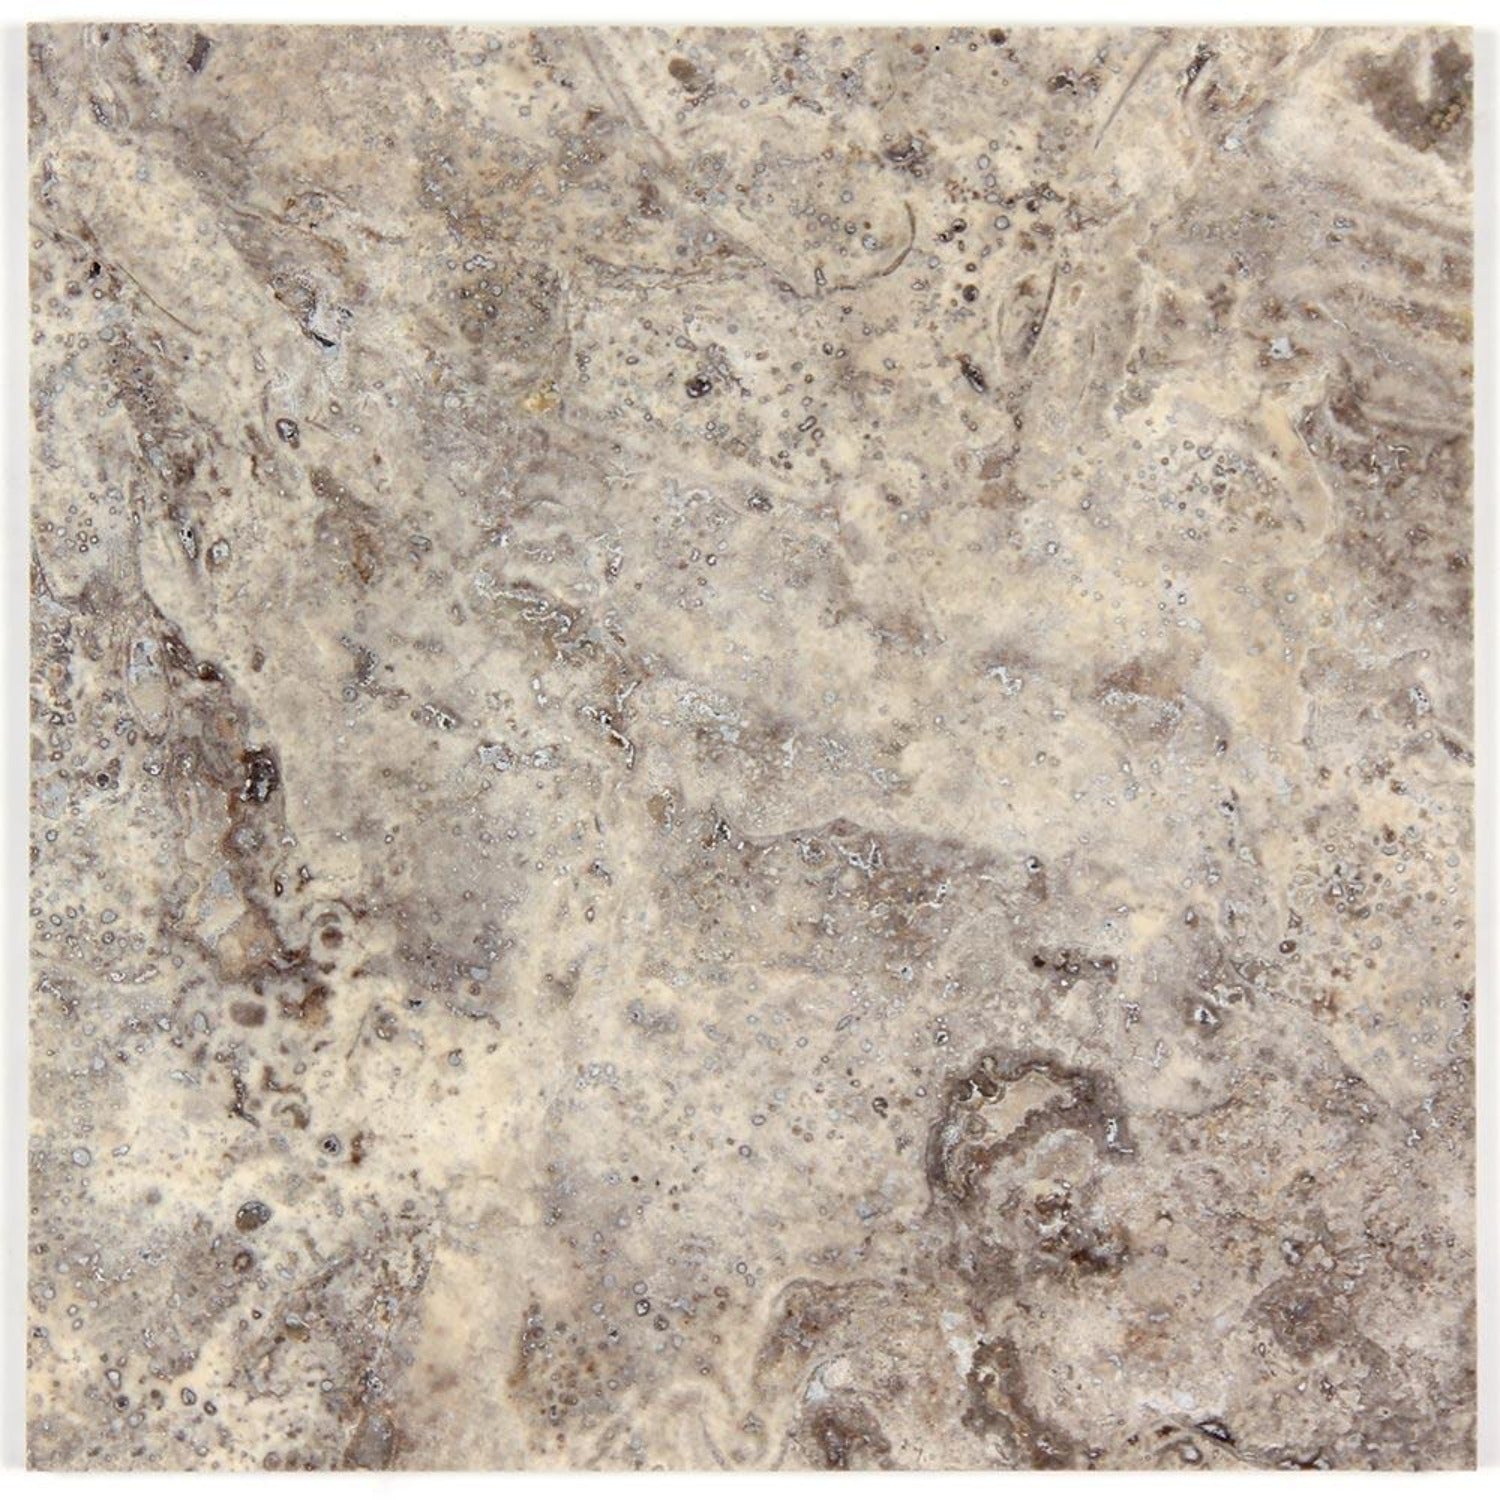 Silver Travertine Honed / Filled 12x12 Floor And Wall Tiles $6.95/SF All Marble Tiles